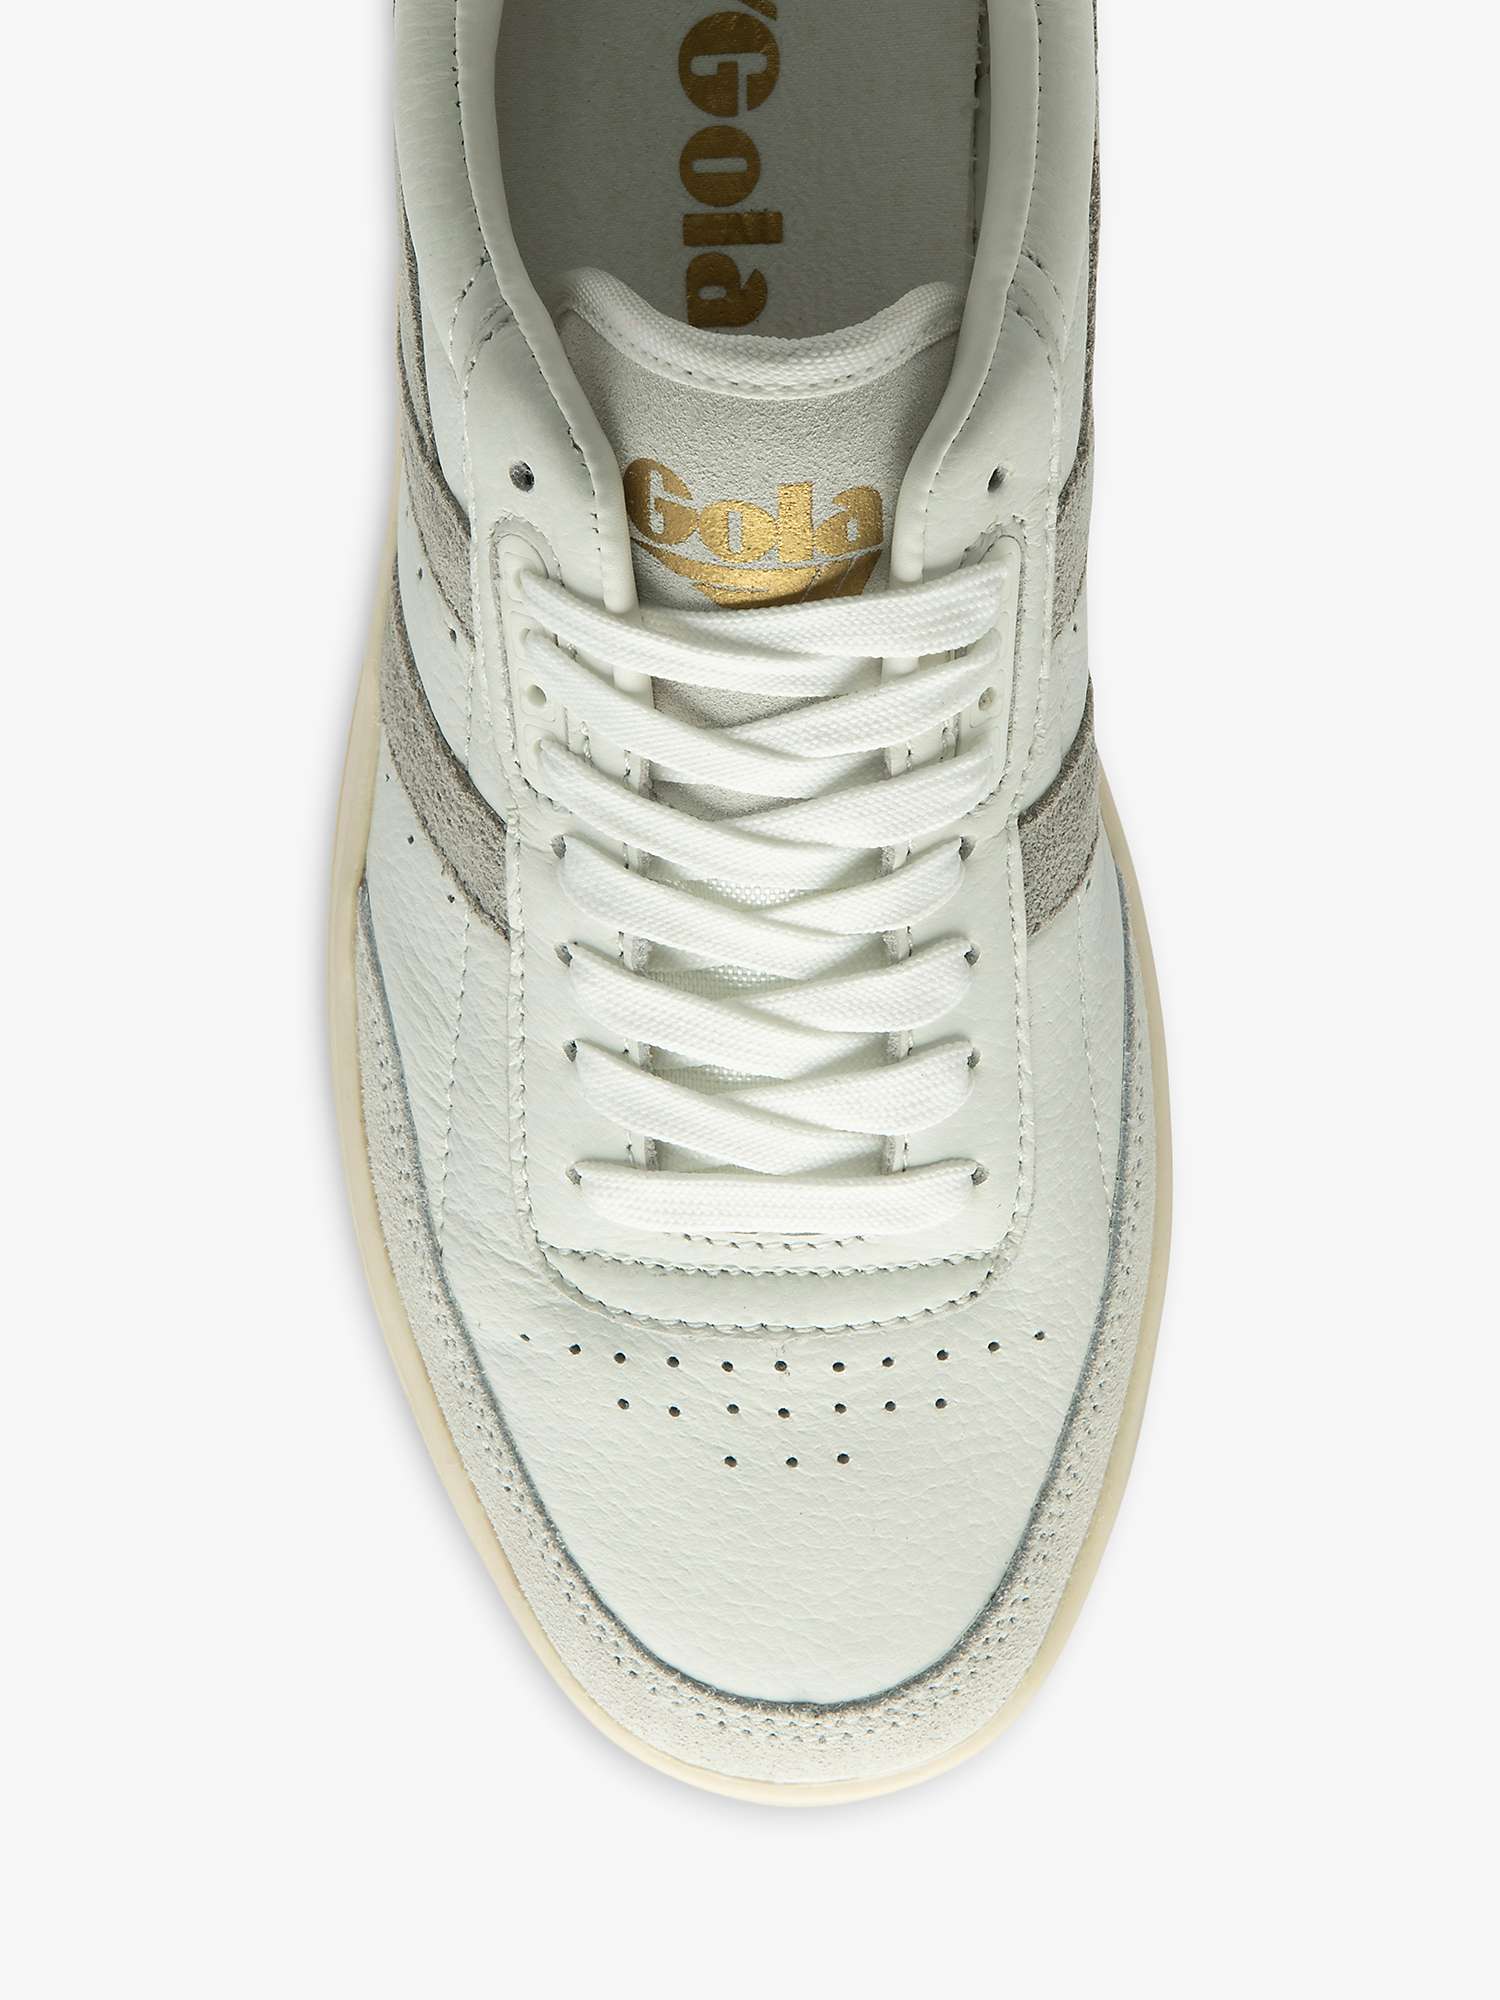 Gola Falcon Leather Trainers, White/Grey/Lavnder at John Lewis & Partners